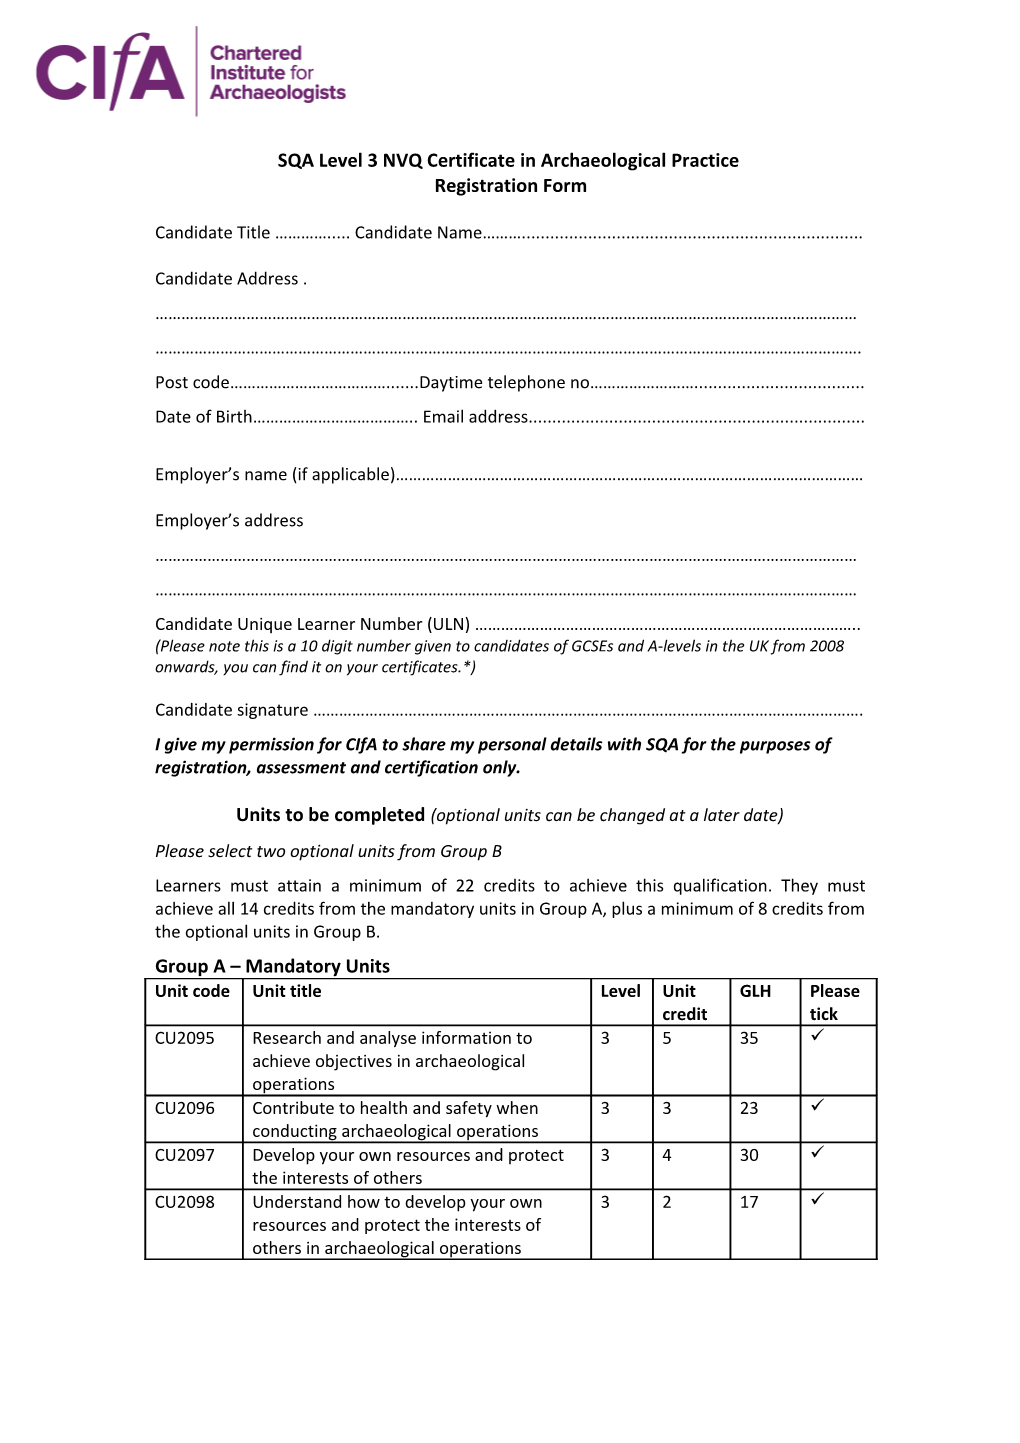 NVQ in Archaeological Practice Registration Form